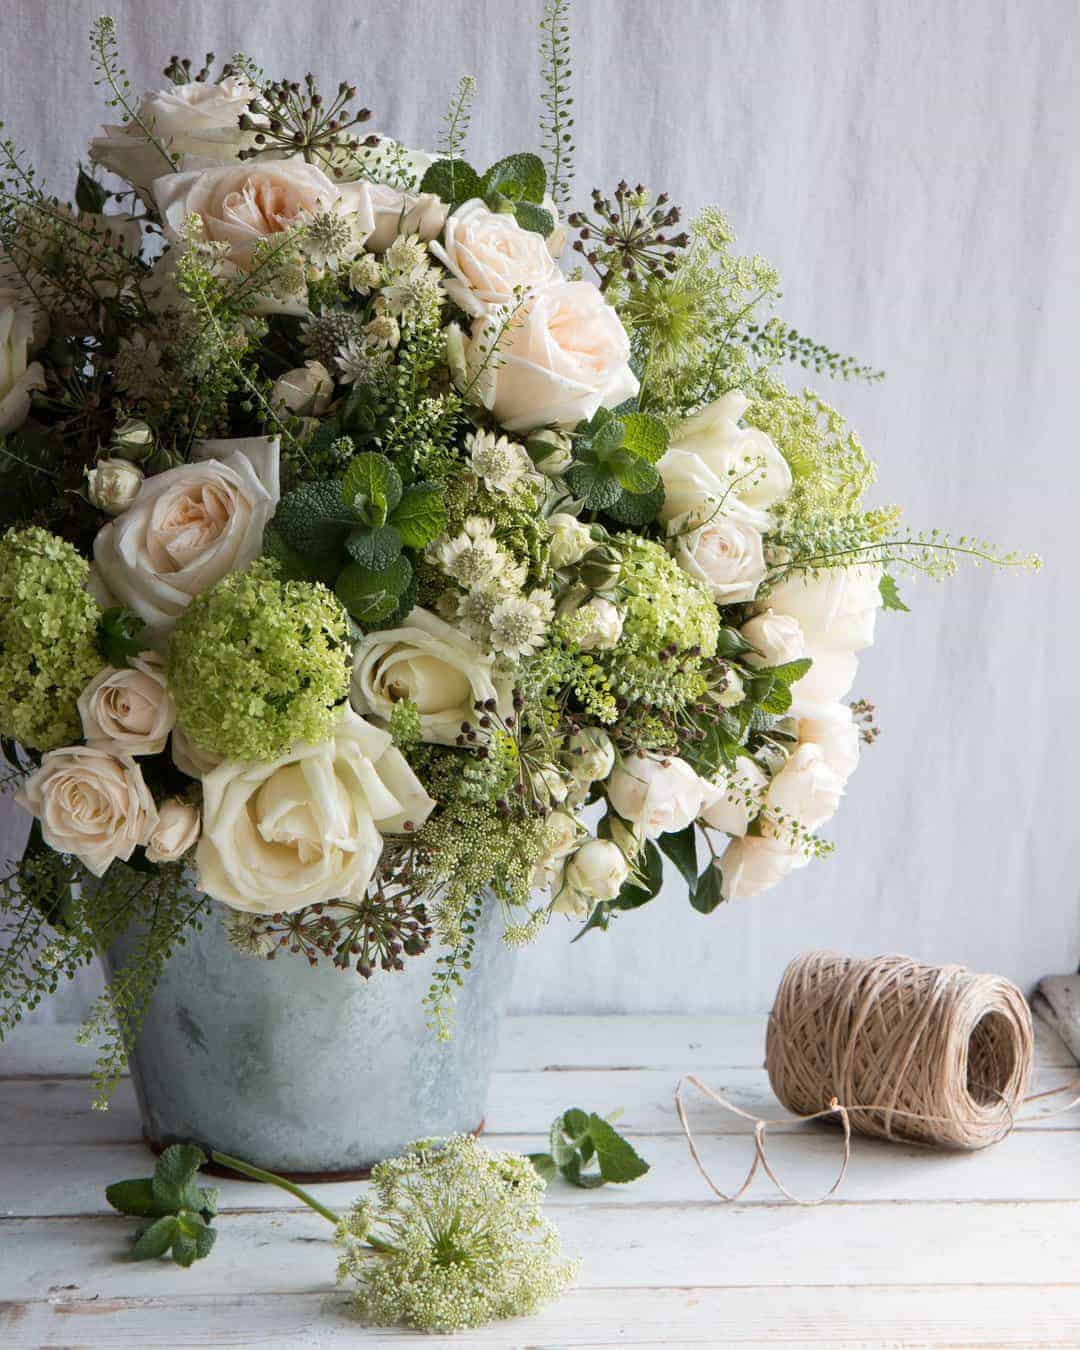 love these pale pink, white and lime green spring flowers by The Real Flower Company - margaret merrill scented roses, fresh mint, seed heads, lime white wild flowers, blossom in a galvanised metal pot. Click through for more beautiful spring flower arrangement ideas you'll love